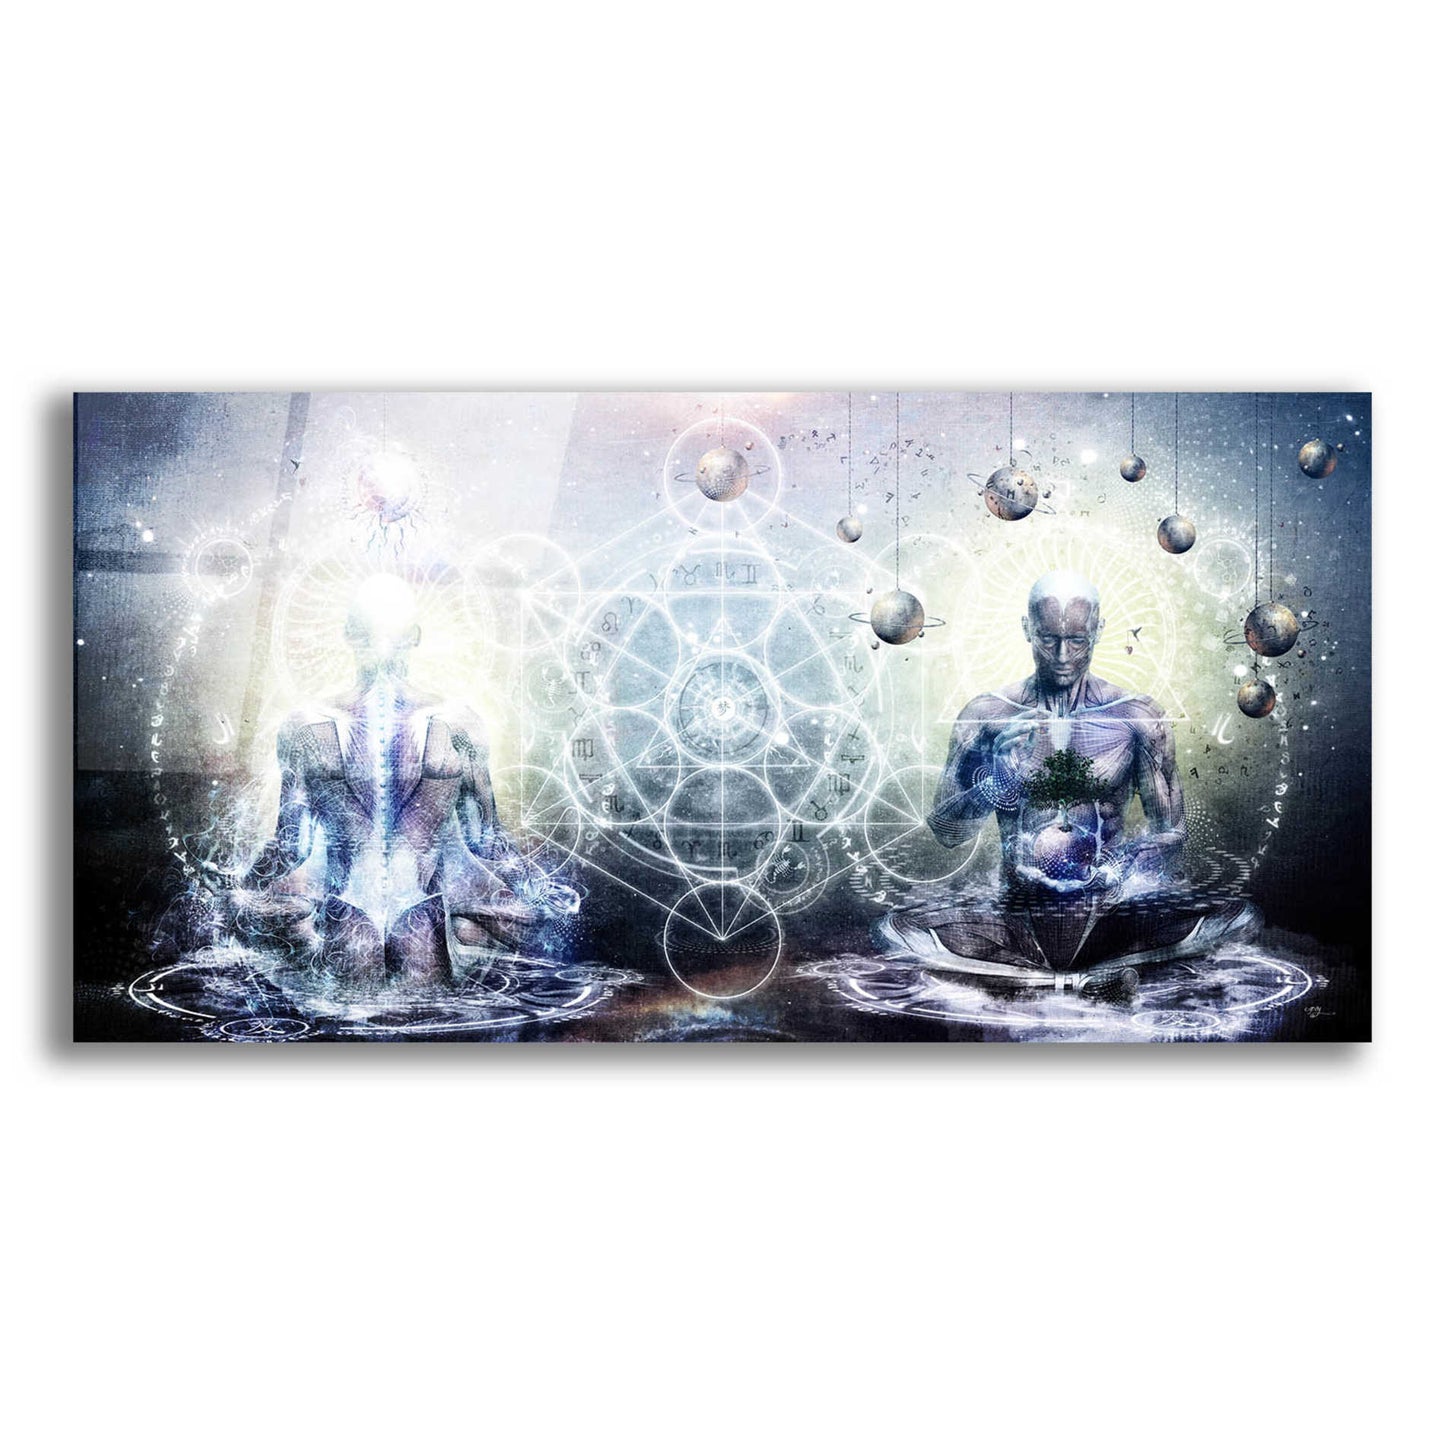 Epic Art 'Experience So Lucid, Discovery So Clear' by Cameron Gray, Acrylic Glass Wall Art,24x12